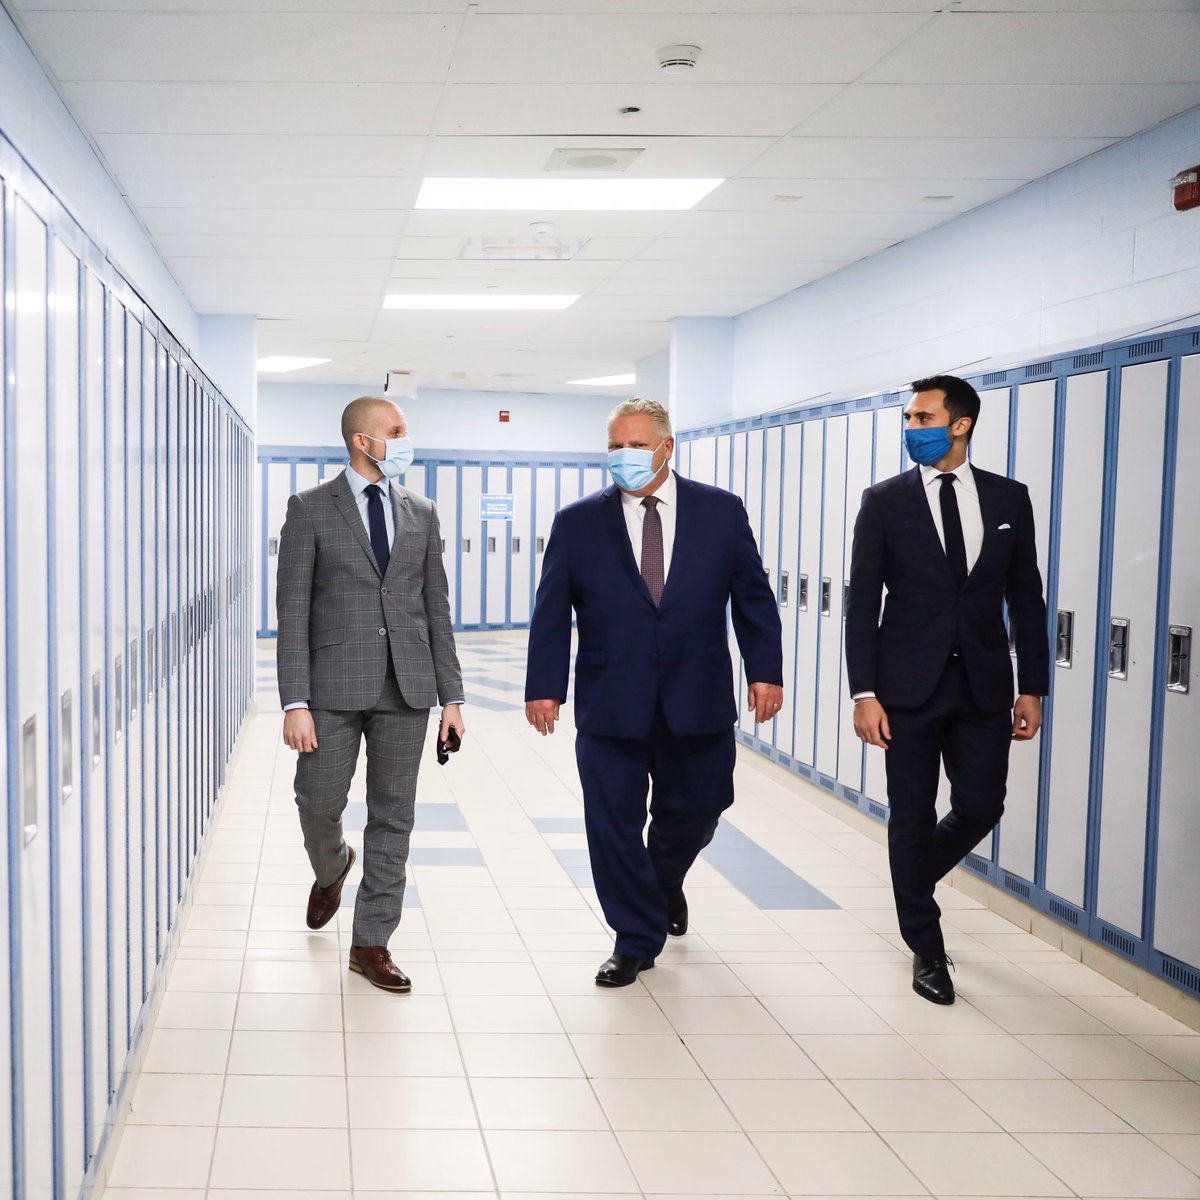 Doug Ford On Twitter Today S Announcement And Funding Will Support Schools Communities And Families Through The Second Wave Of Covid 19 Voluntary Testing For Asymptomatic Students Additional Funding To High Priority Regions Funding Stabilization